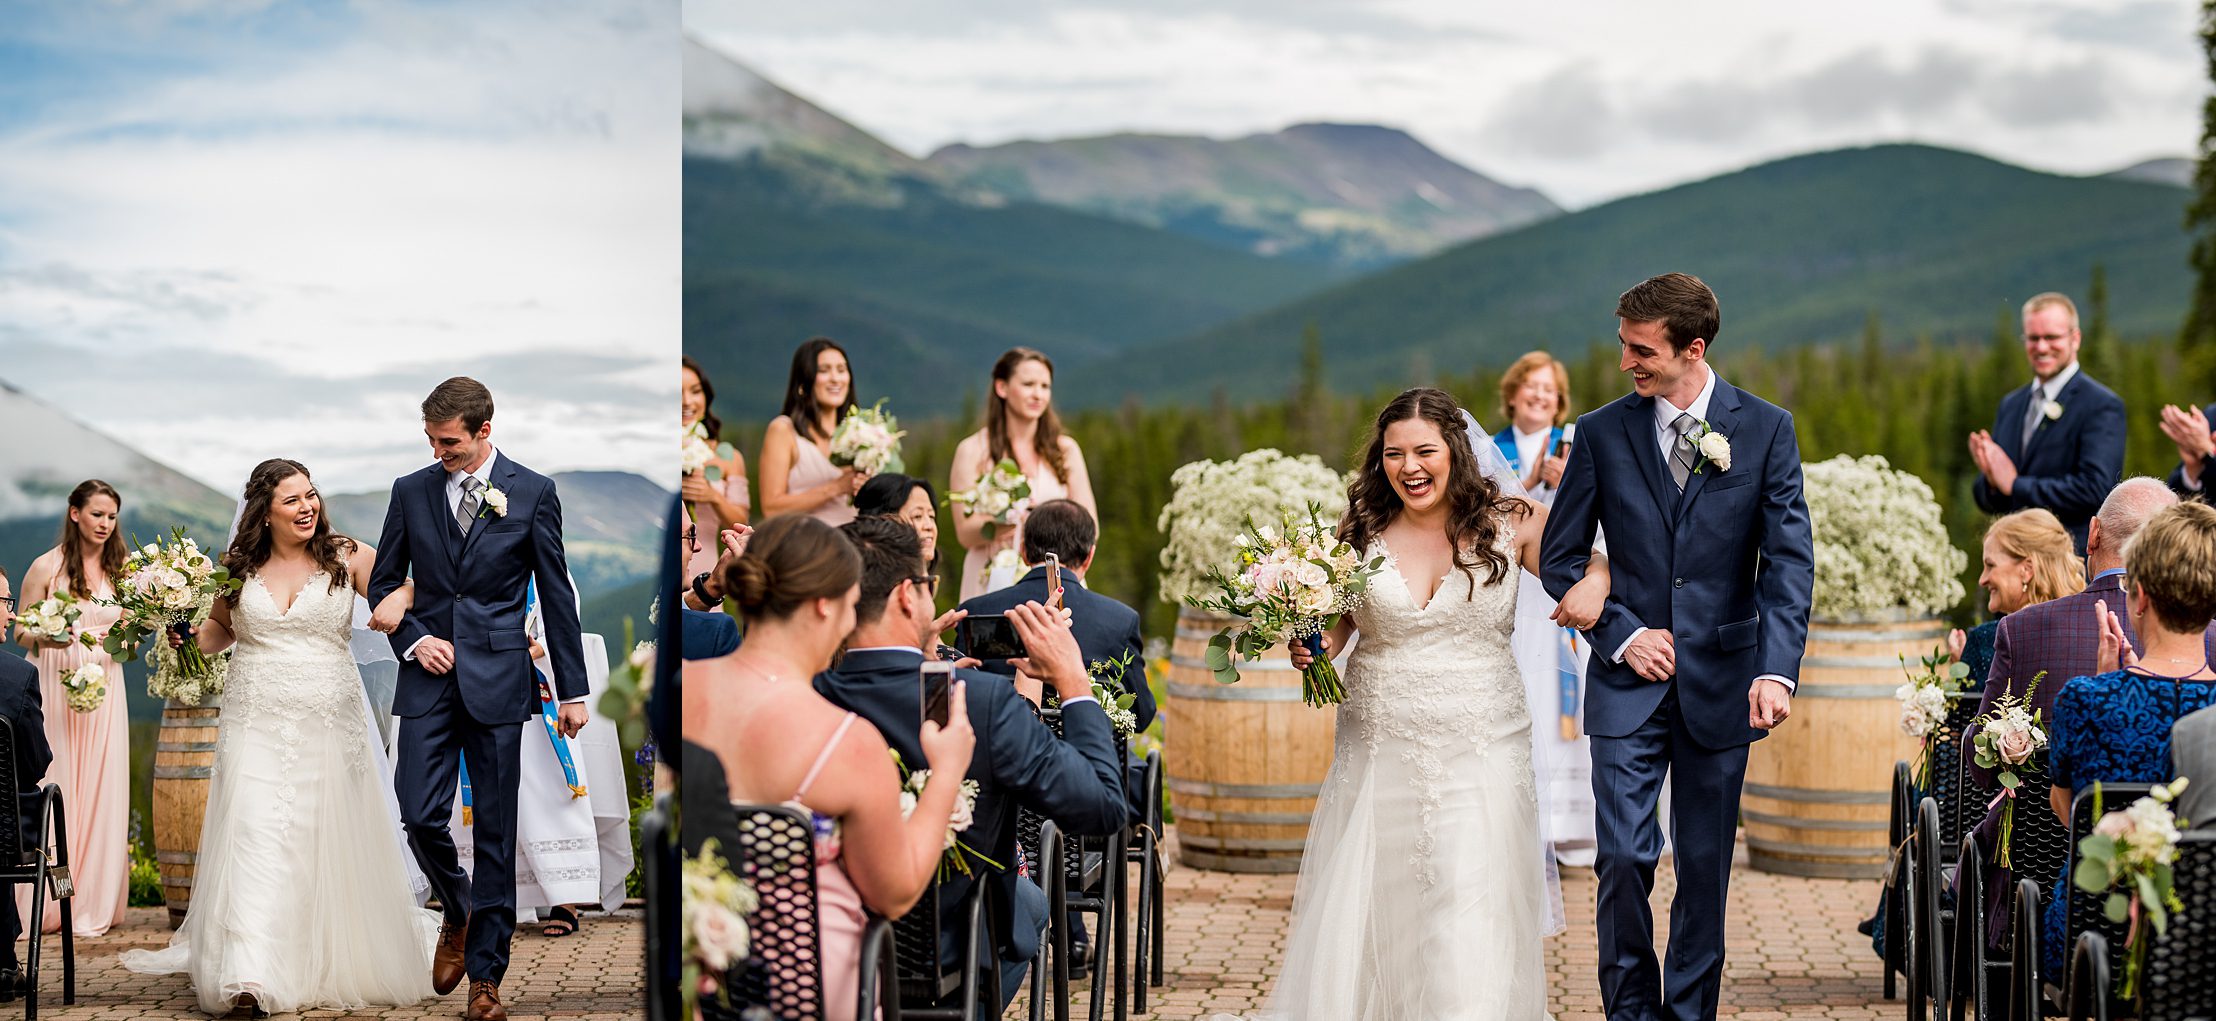 Bride and groom just got married in Breckenridge, CO